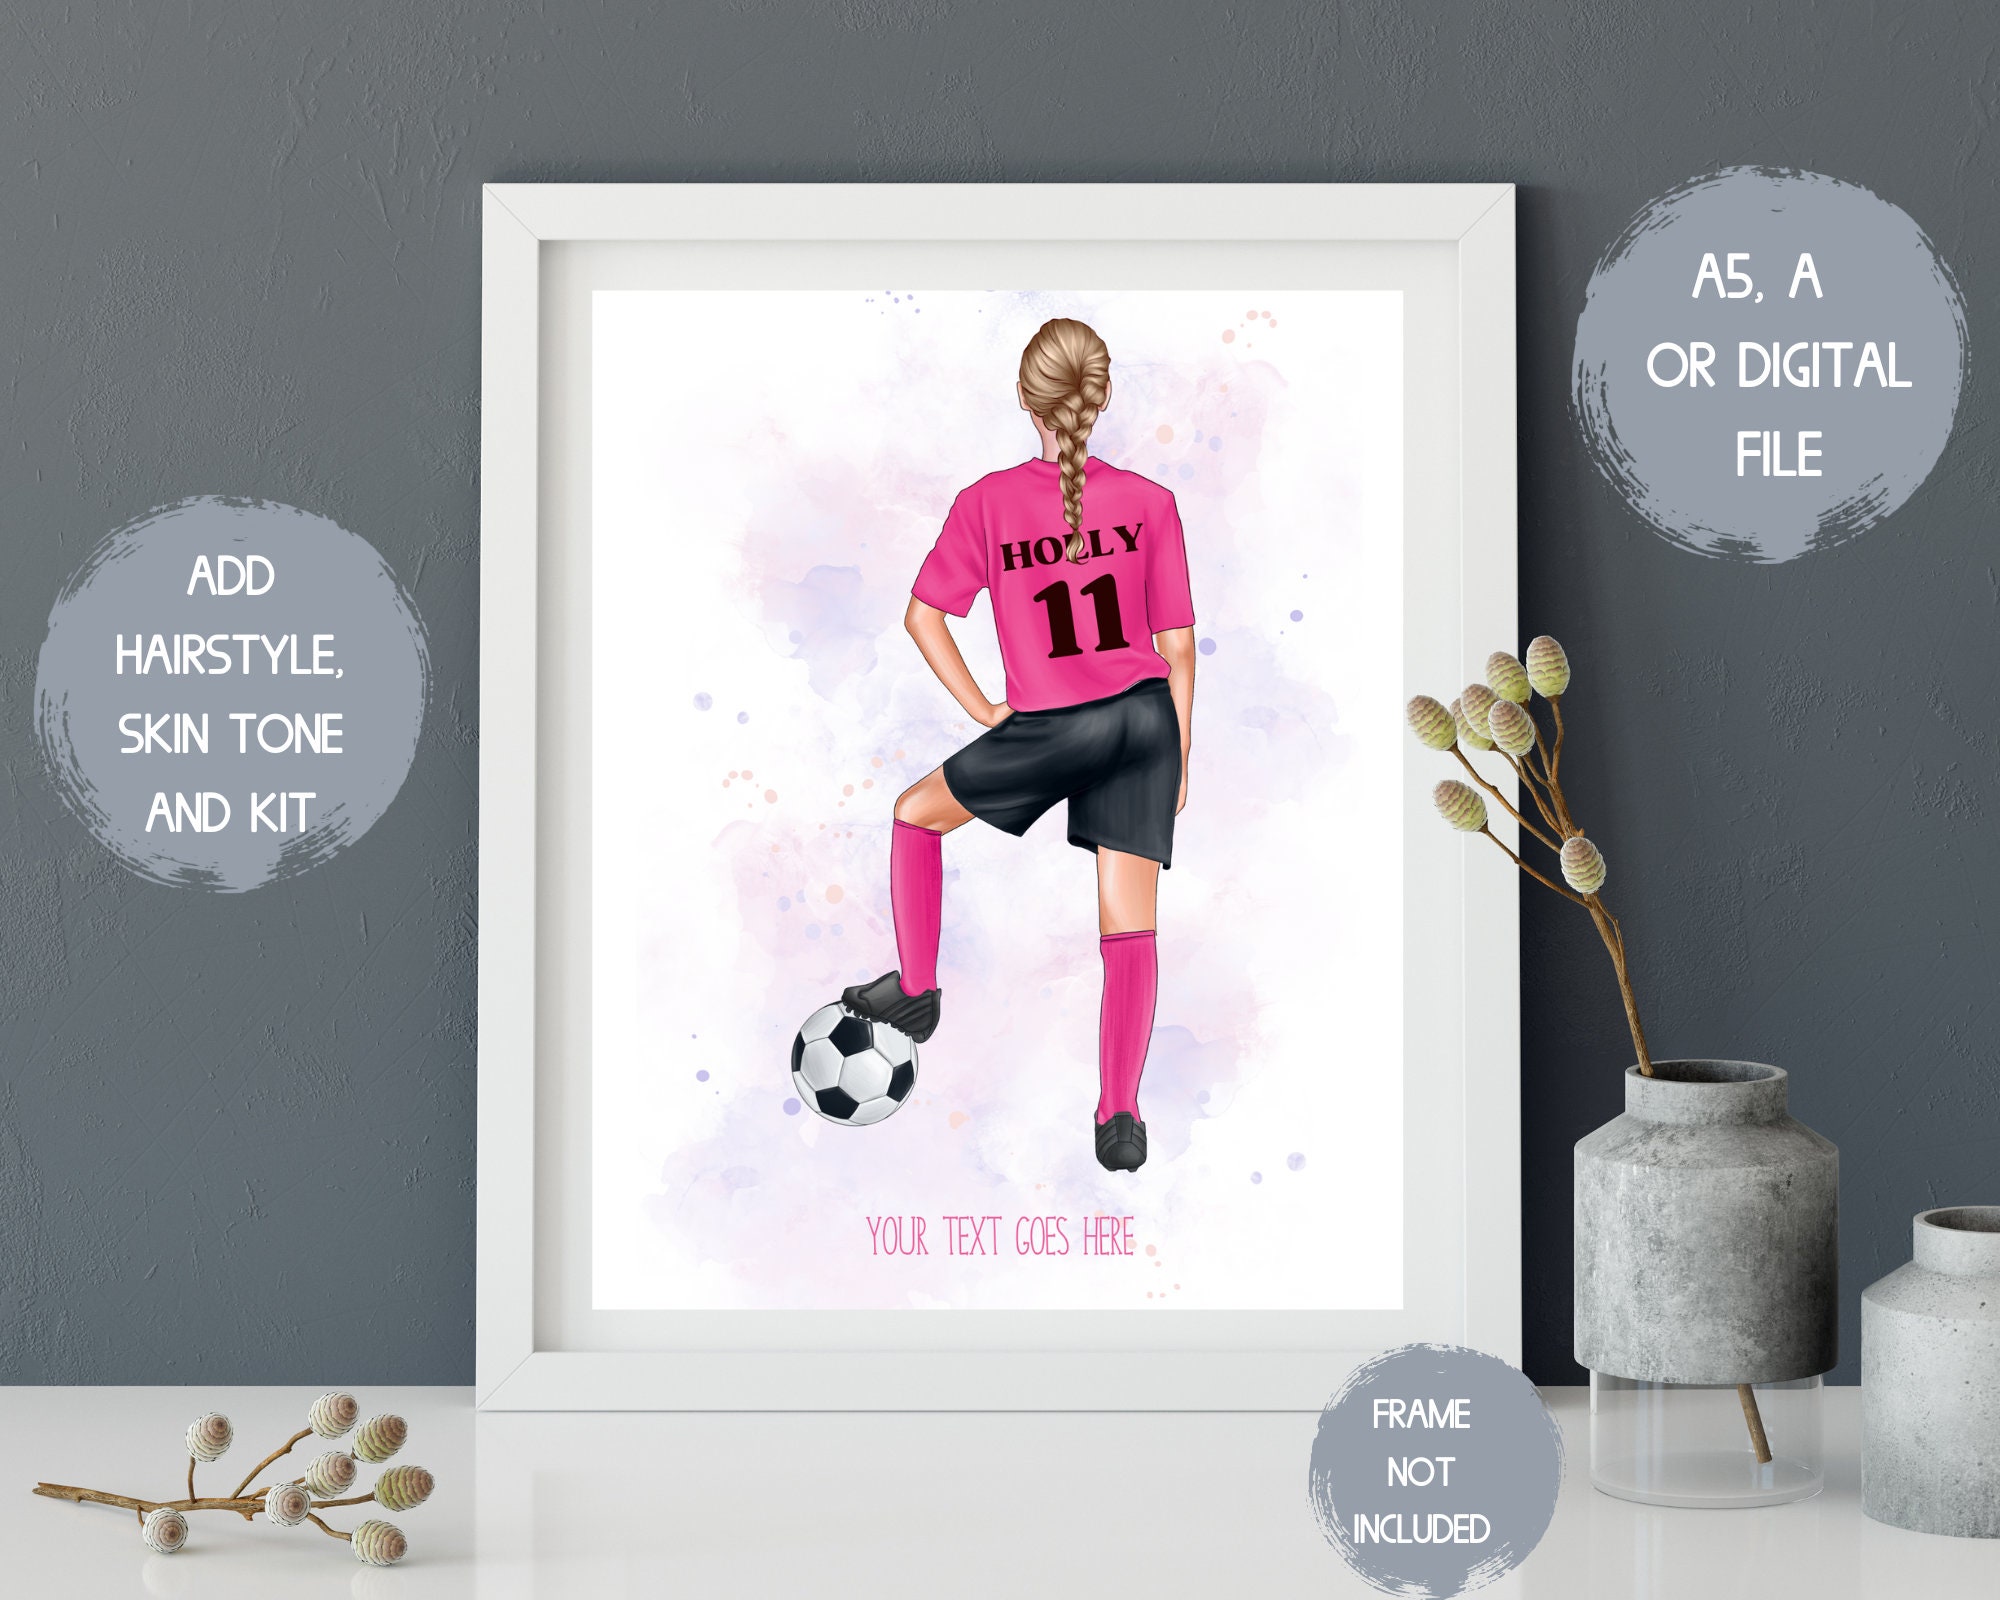 Onebttl Soccer Gifts for Teen Boys, Soccer Gifts for Son, Grandson, Soccer  lovers, Trainee from Pare…See more Onebttl Soccer Gifts for Teen Boys